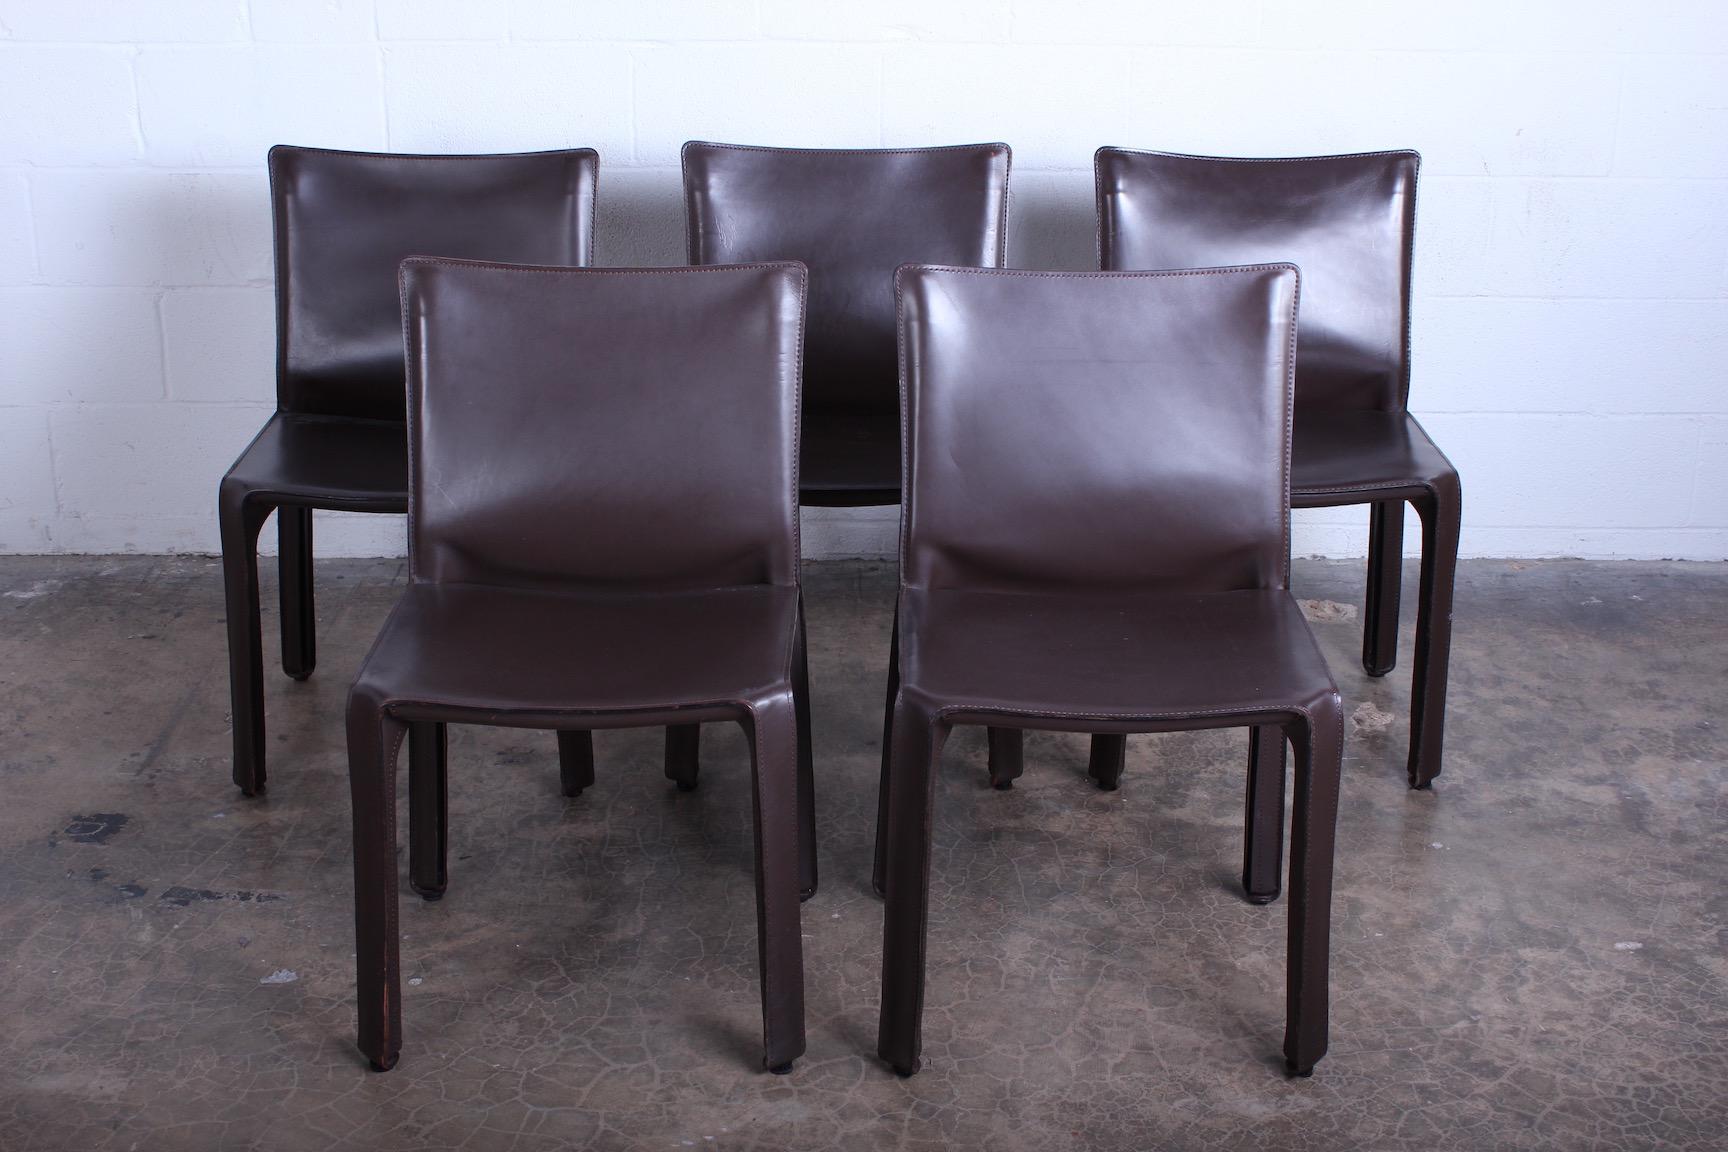 A set of five brown leather cab chairs designed by Mario Bellini for Cassina.